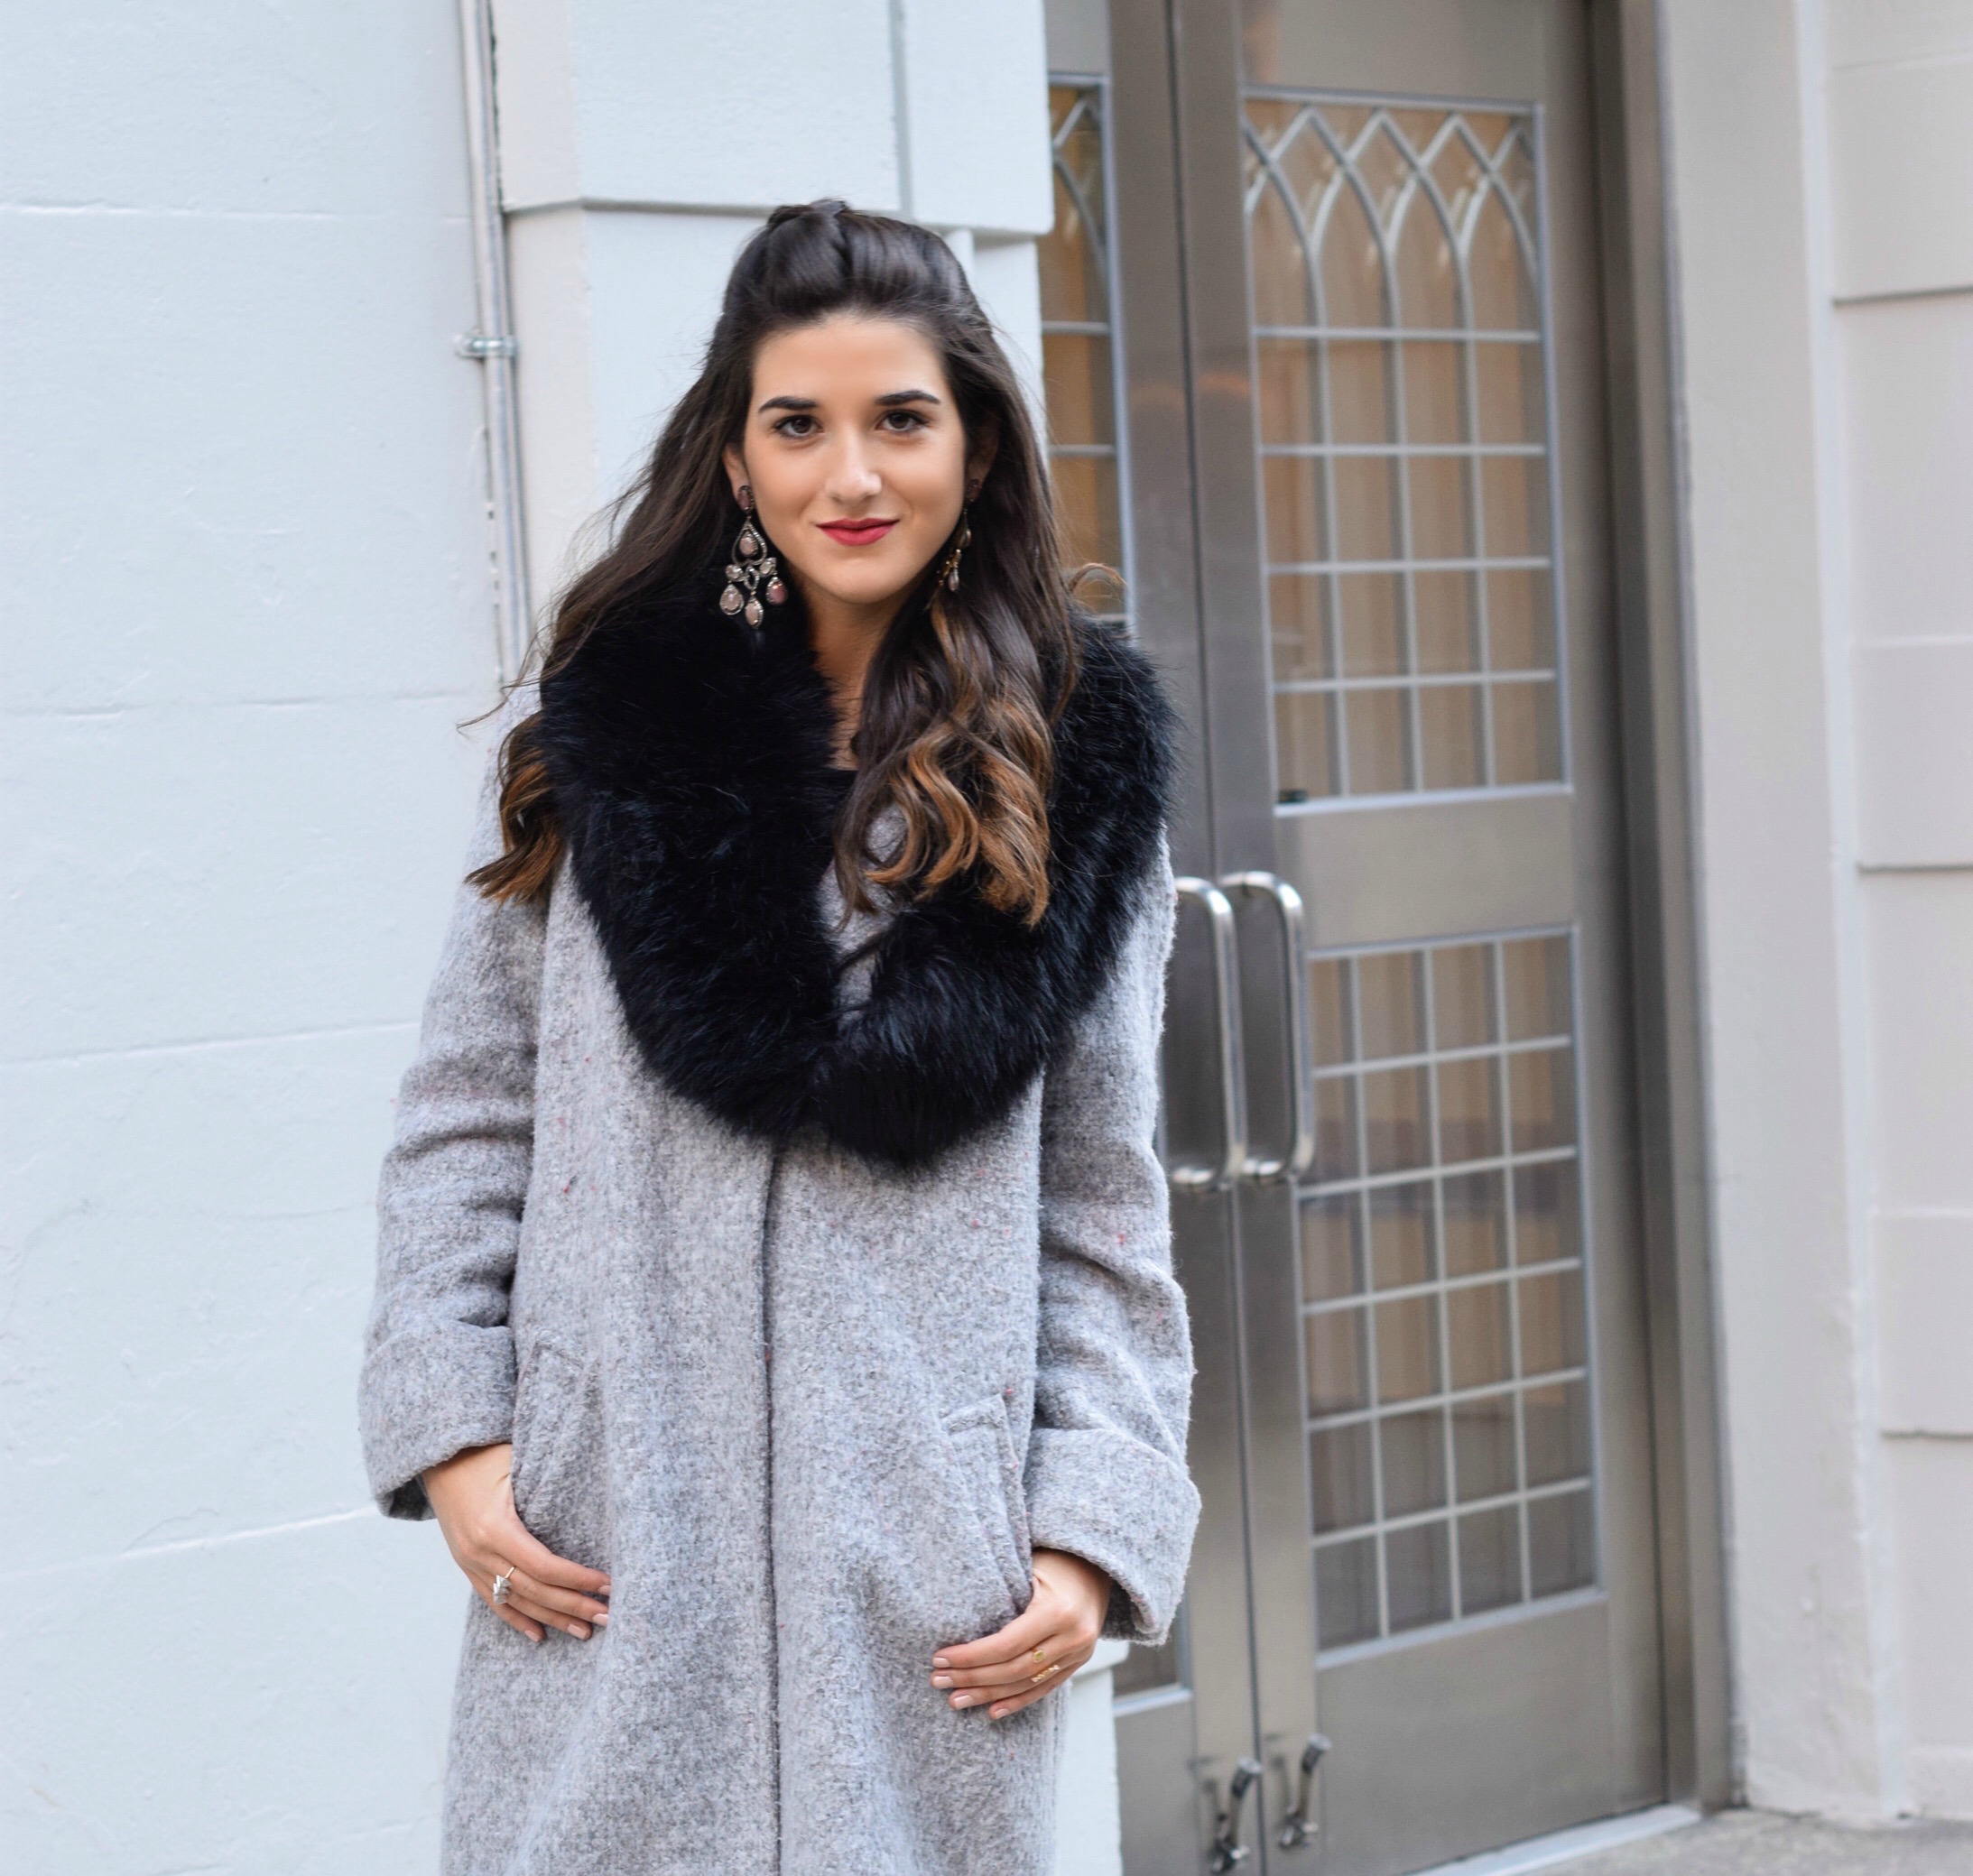 Dripping In Diamonds Elahn Jewels Louboutins & Love Fashion Blog Esther Santer NYC Street Style Blogger Black Fur Stole Earrings Jewelry Grey Peacoat Coat Winter Wear Shopping Beauty Chic Rings Red Sandals Heels Inspo Hair Inspiration OOTD Outfit Zara.jpg